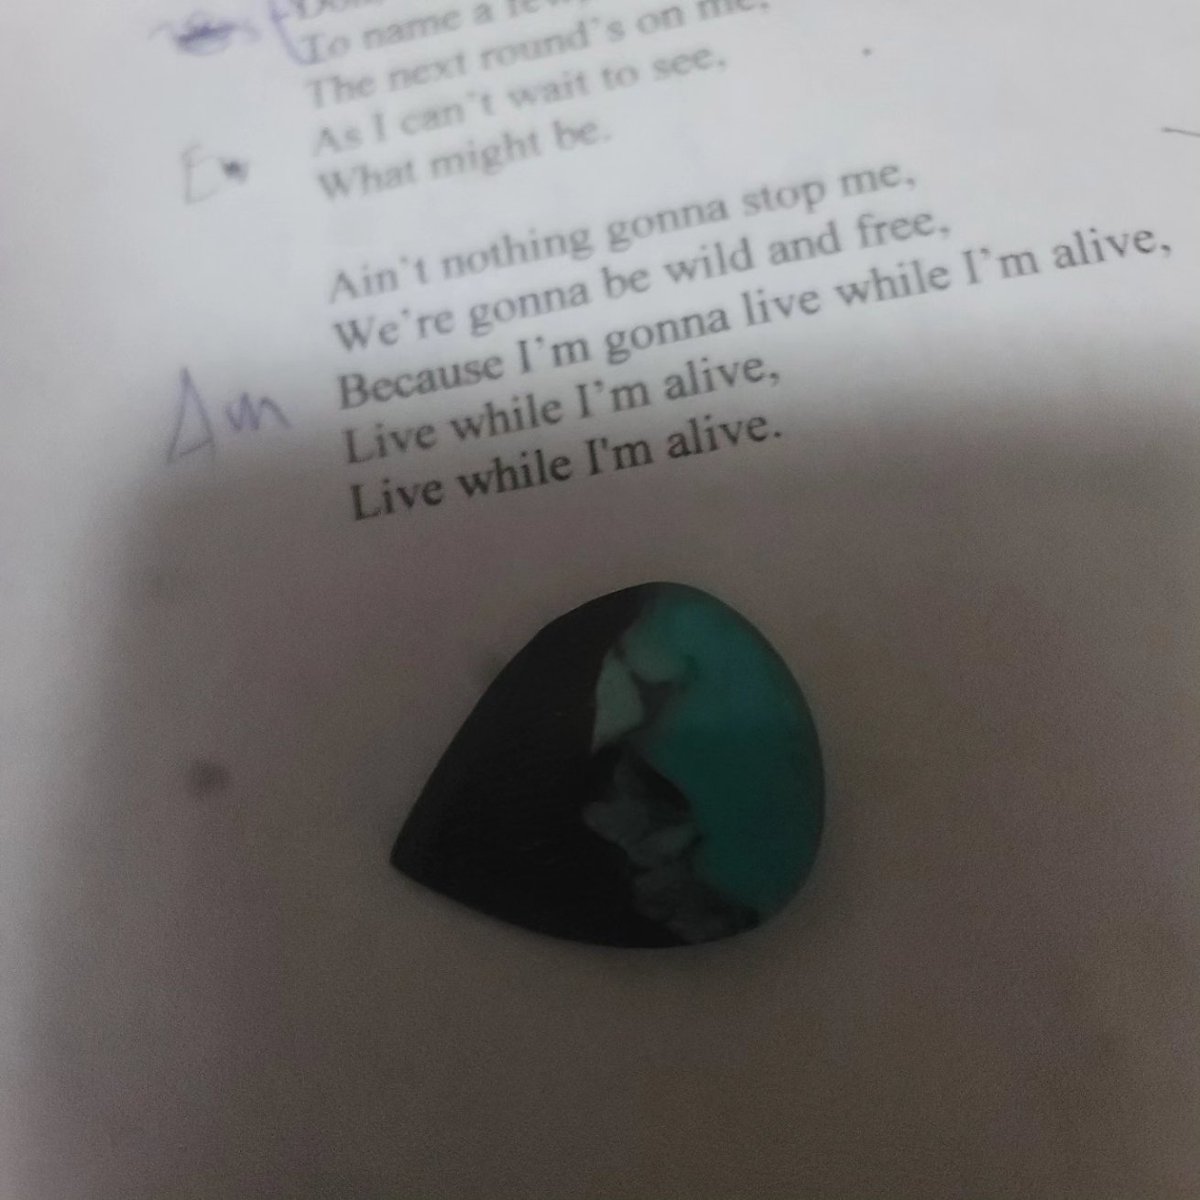 I will also be using a thicker pick tonight that will give the song a little different sound than before. Stay tuned! #musician #musicaljourney #songwriter